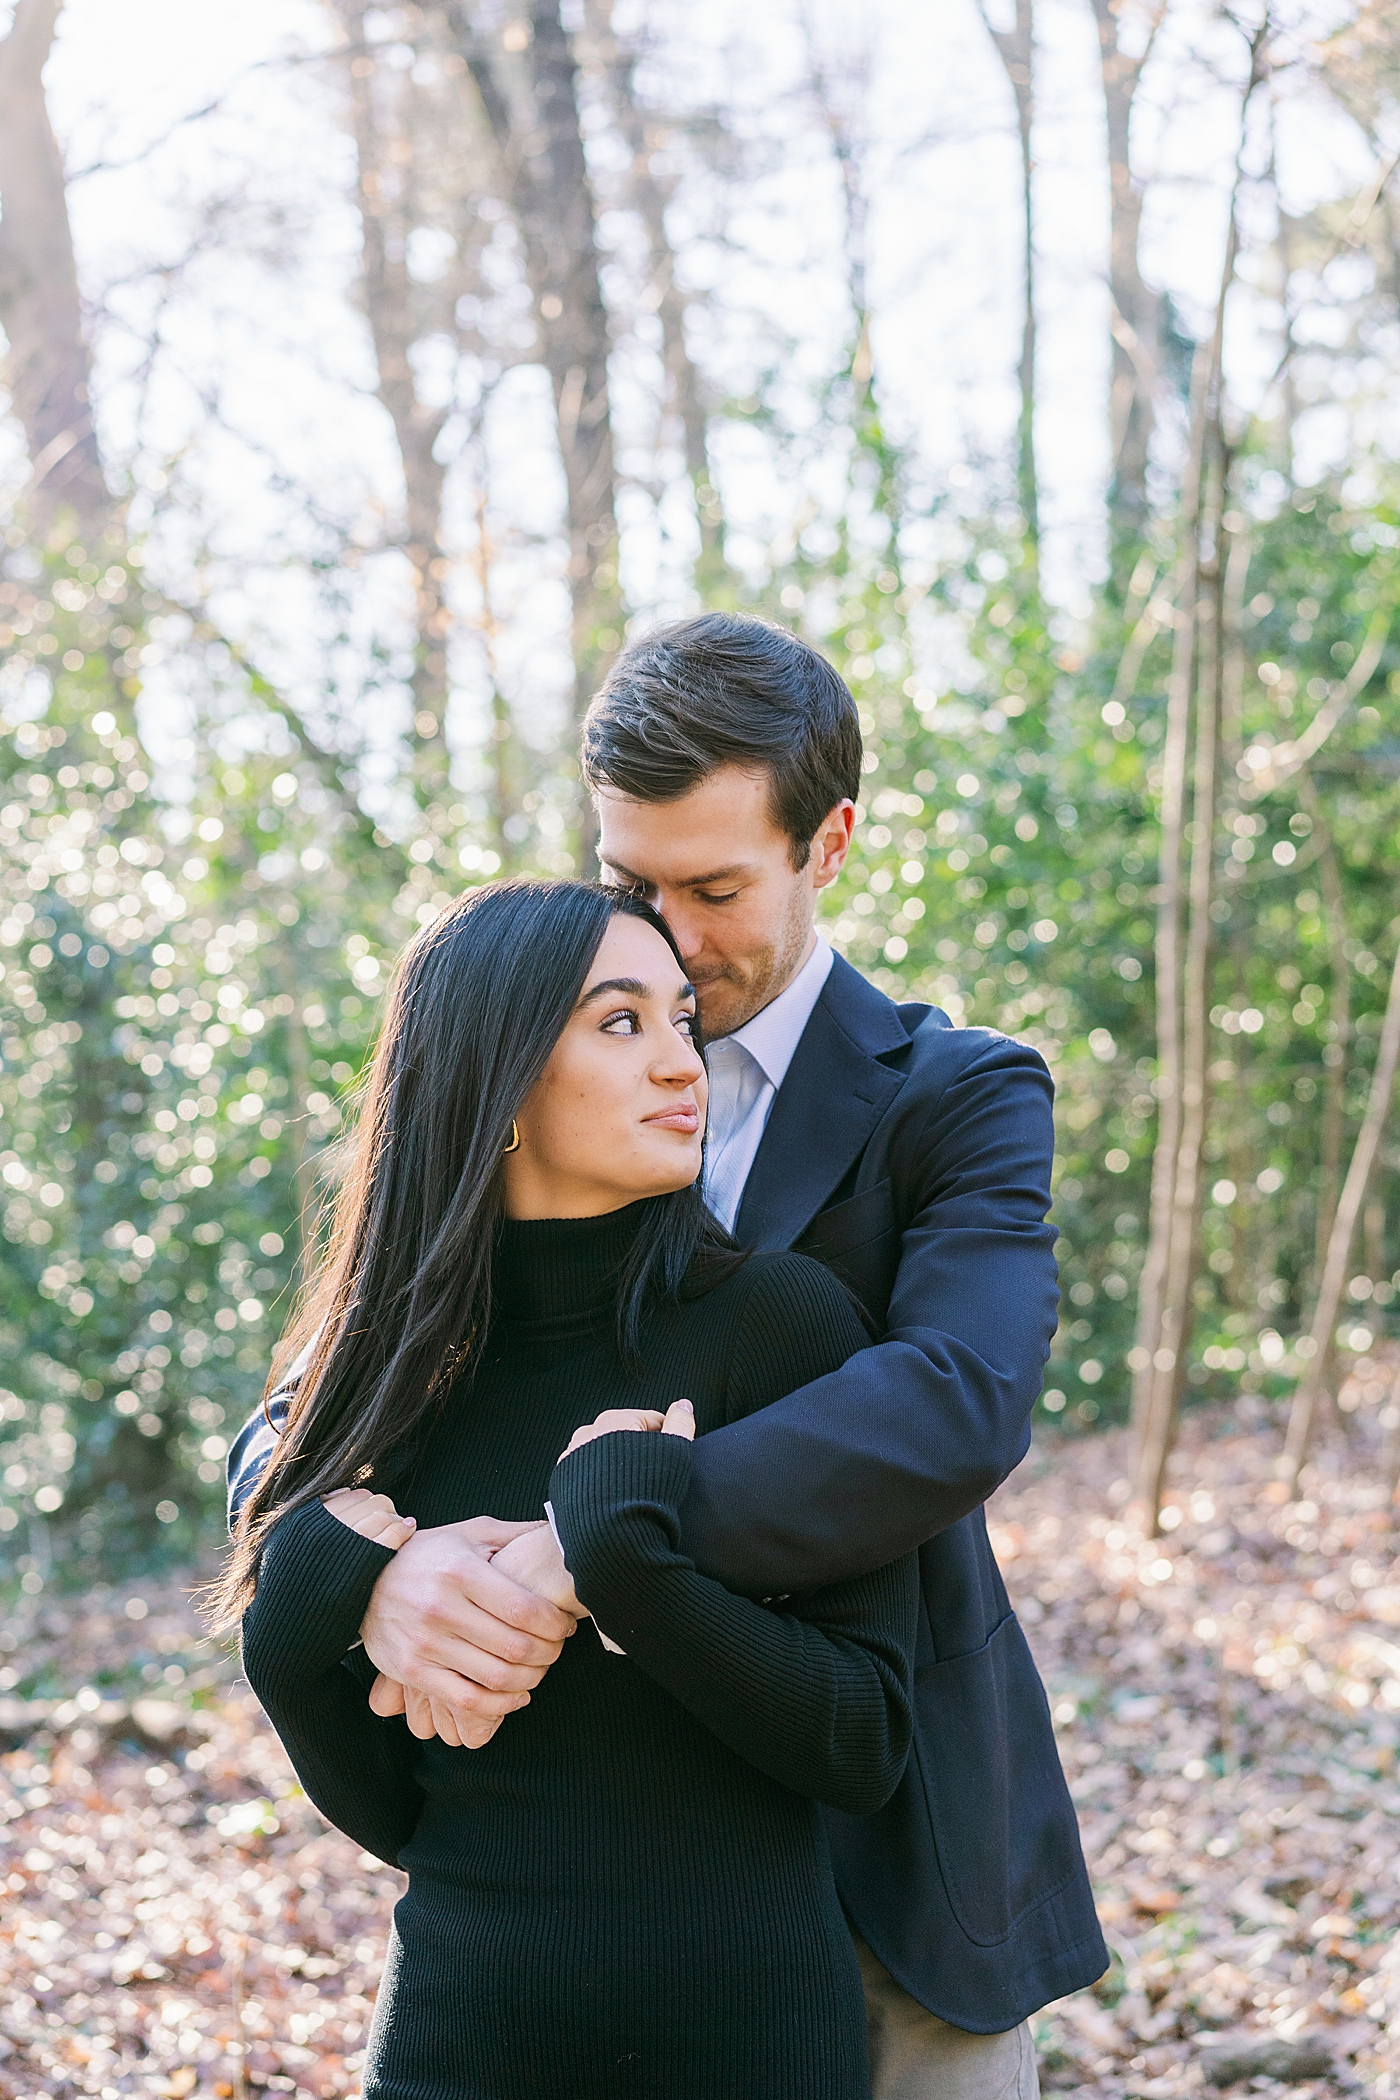 Couple snuggling during their engagement session | Image by Annie Laura Photo